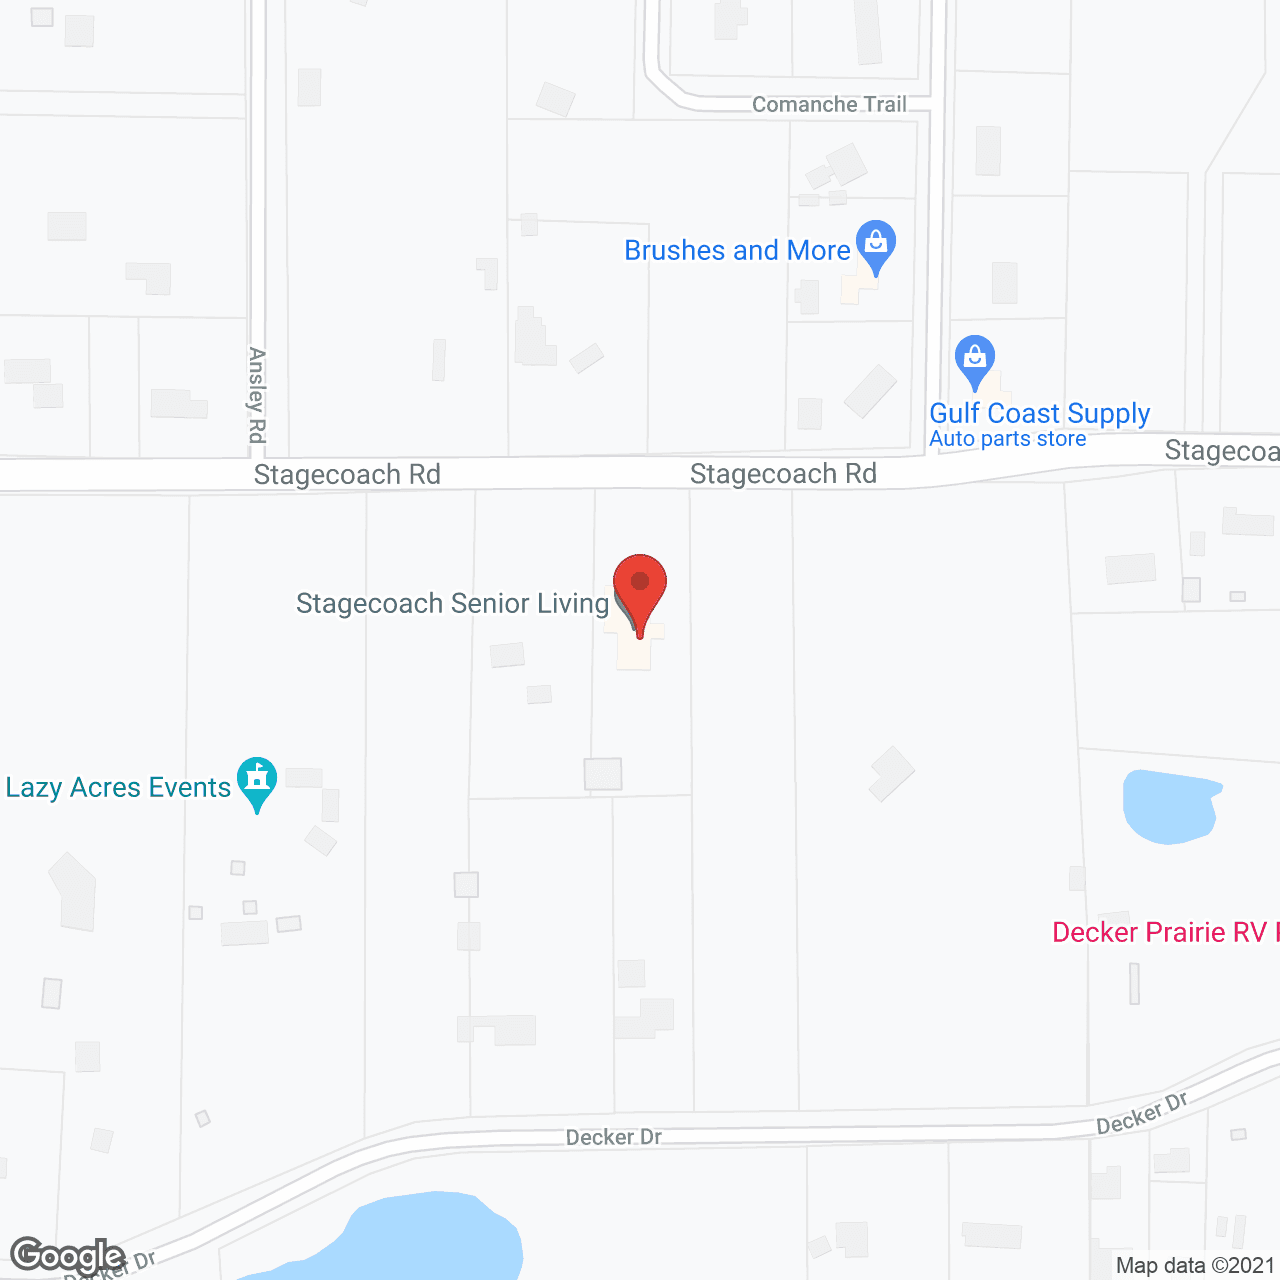 Stagecoach Senior Living in google map